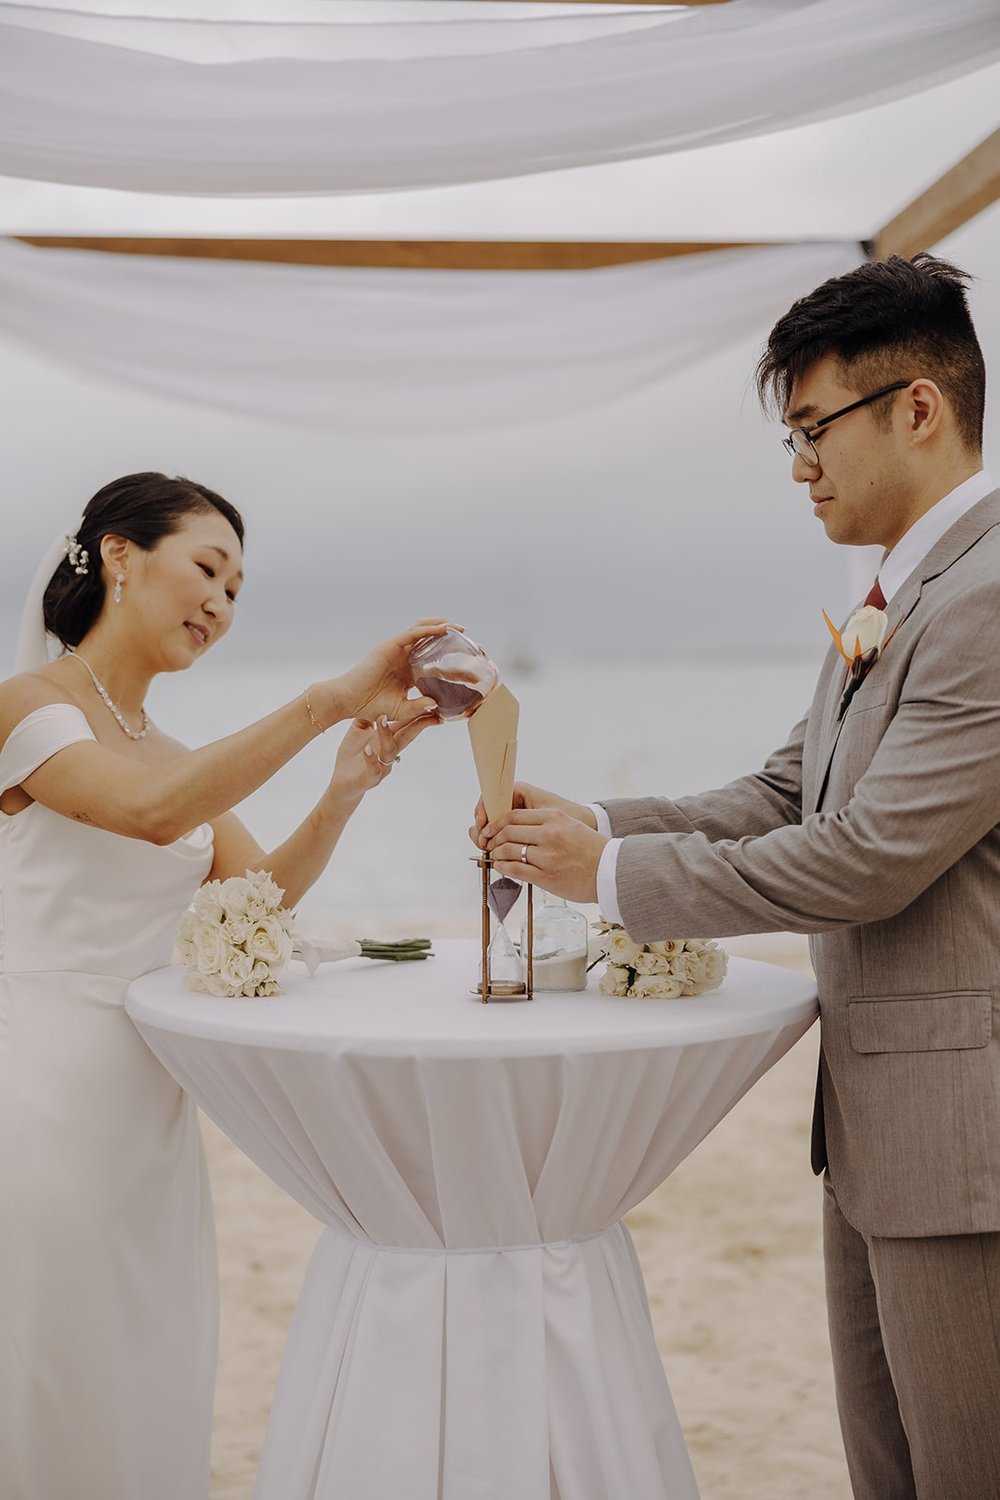 Bride and groom pour sand during their Mexico resort wedding ceremony on the beach